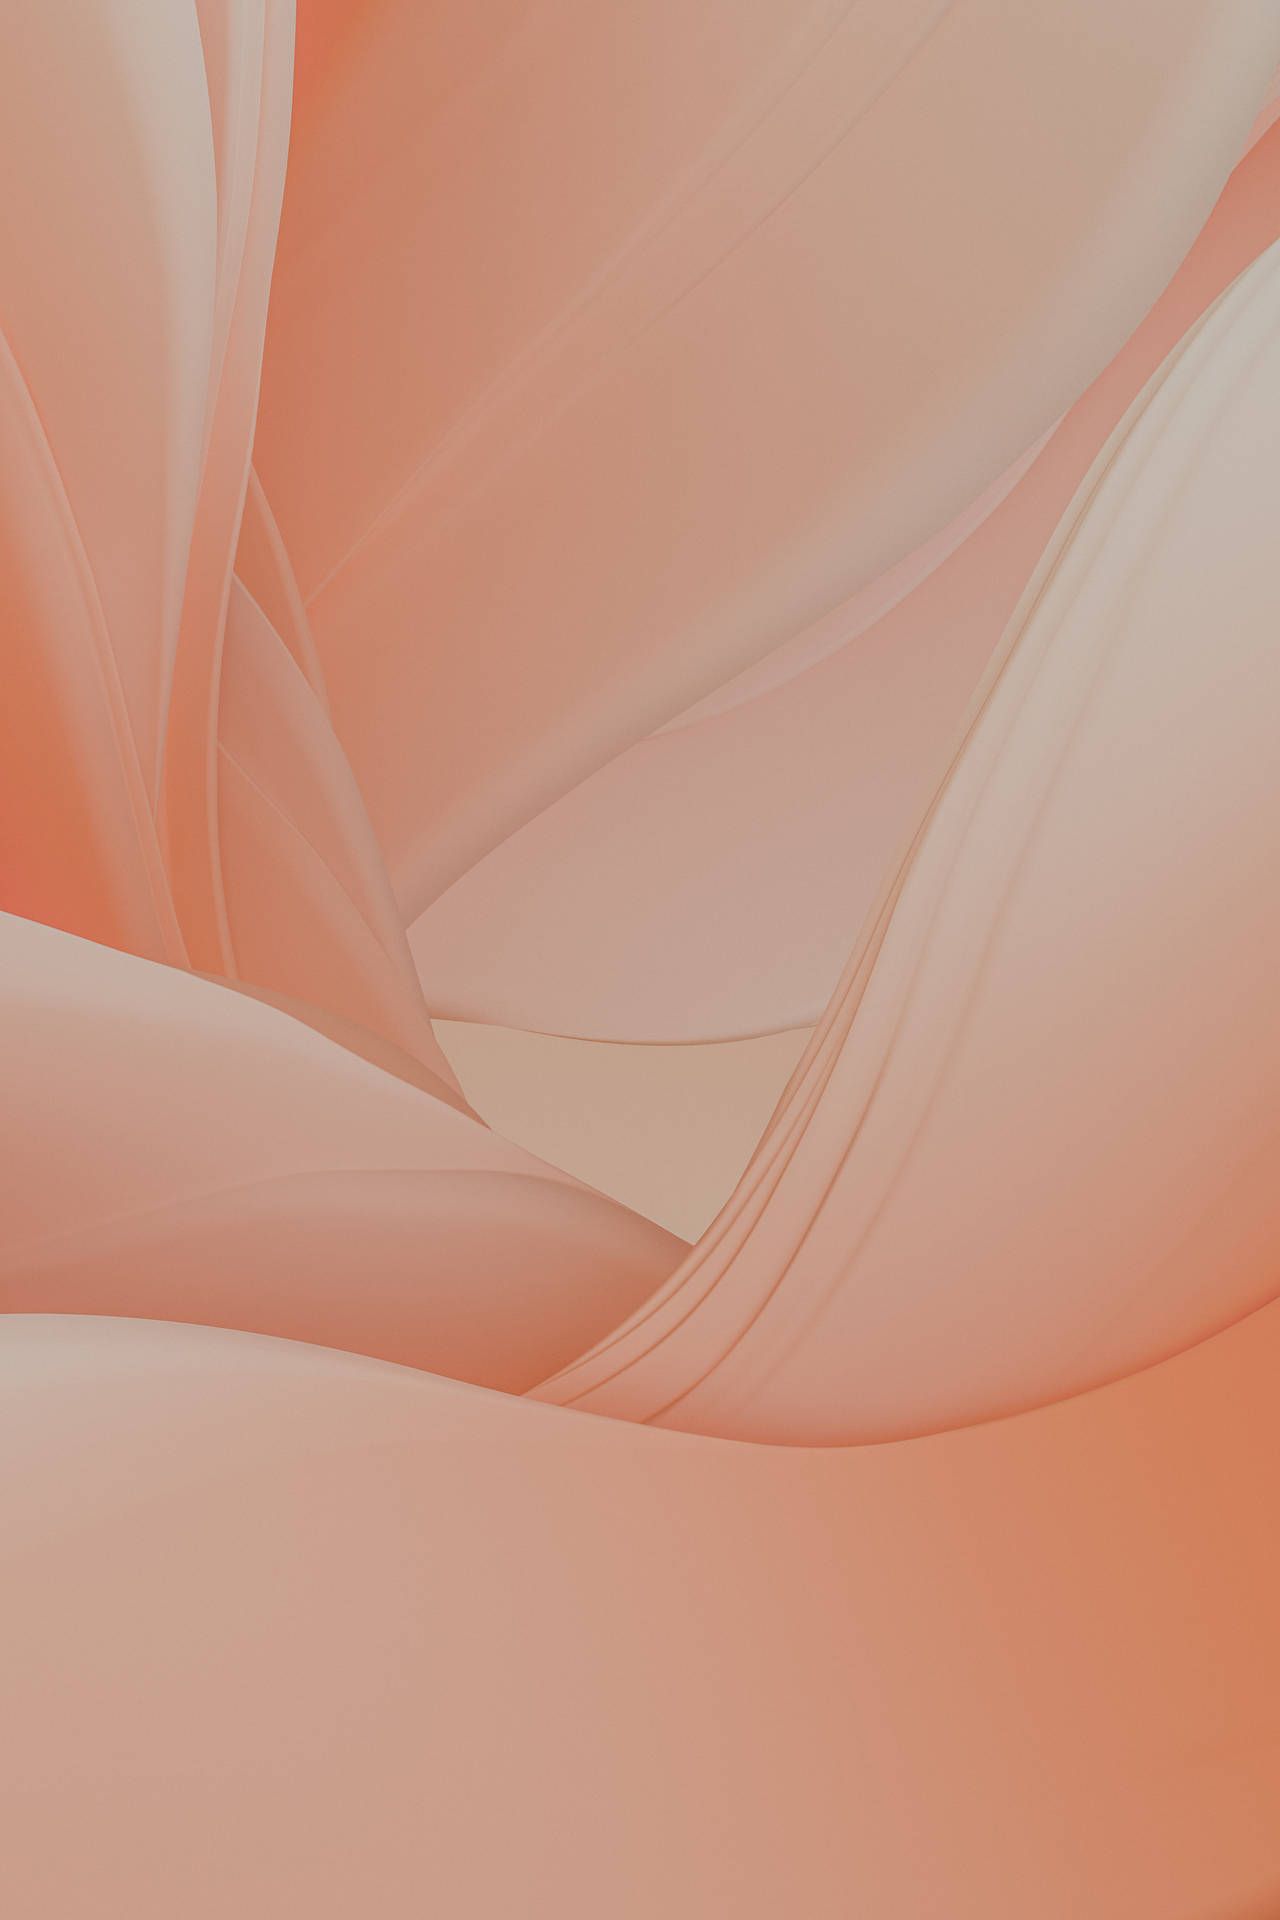 A soft, flowing fabric background in shades of pink and peach. - Pastel orange